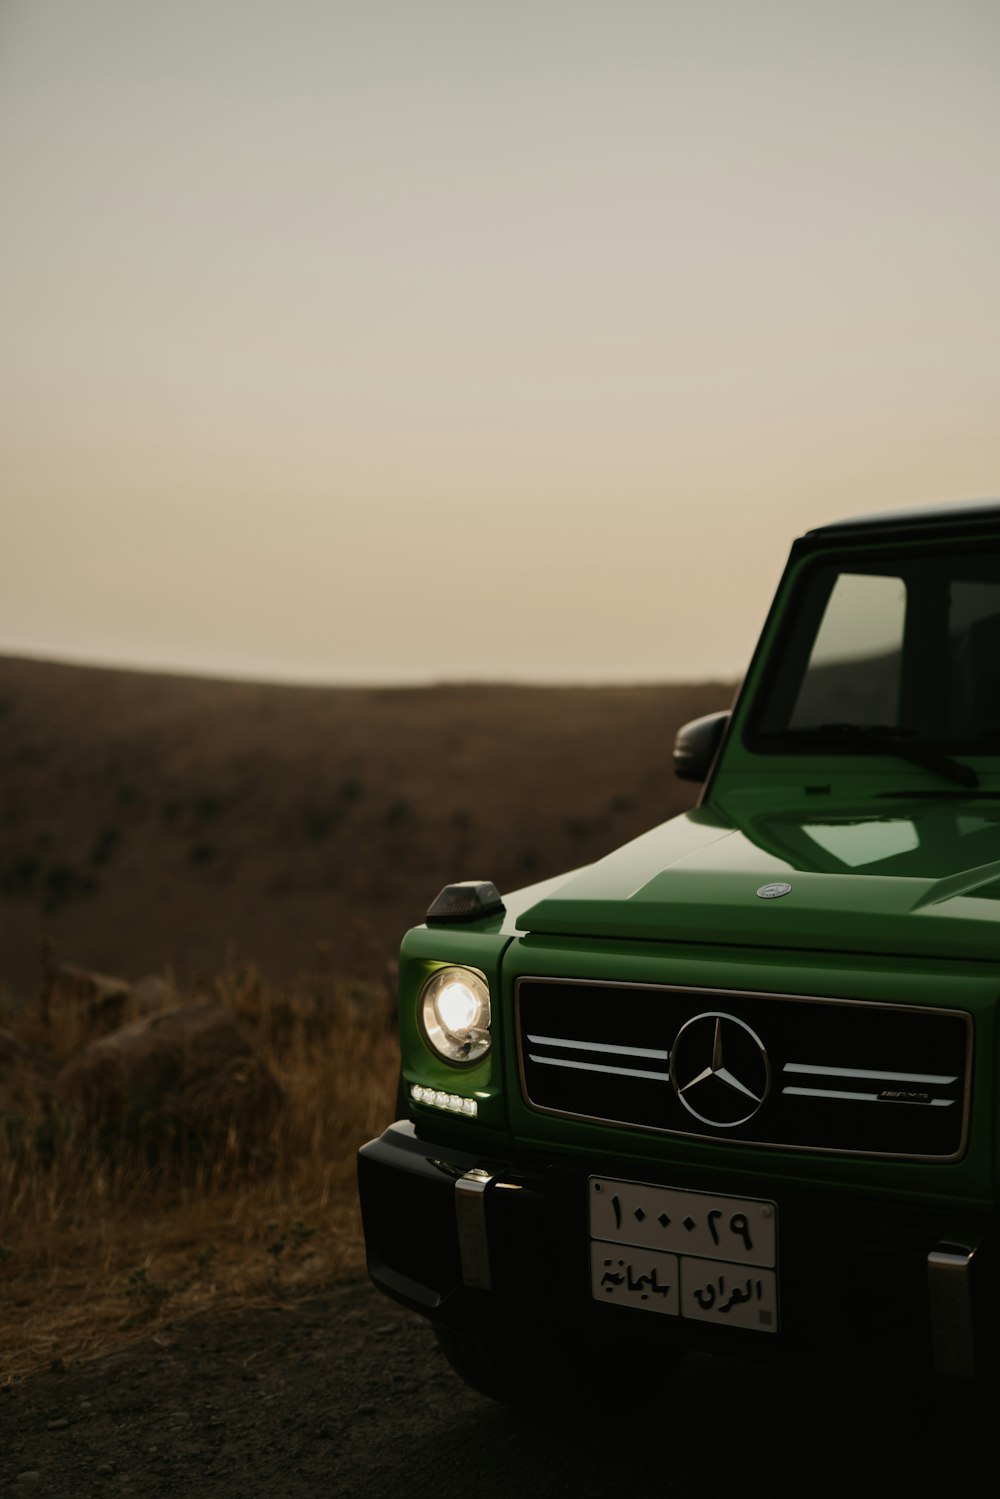 green jeep wrangler on brown field during daytime photo – Free G class  Image on Unsplash